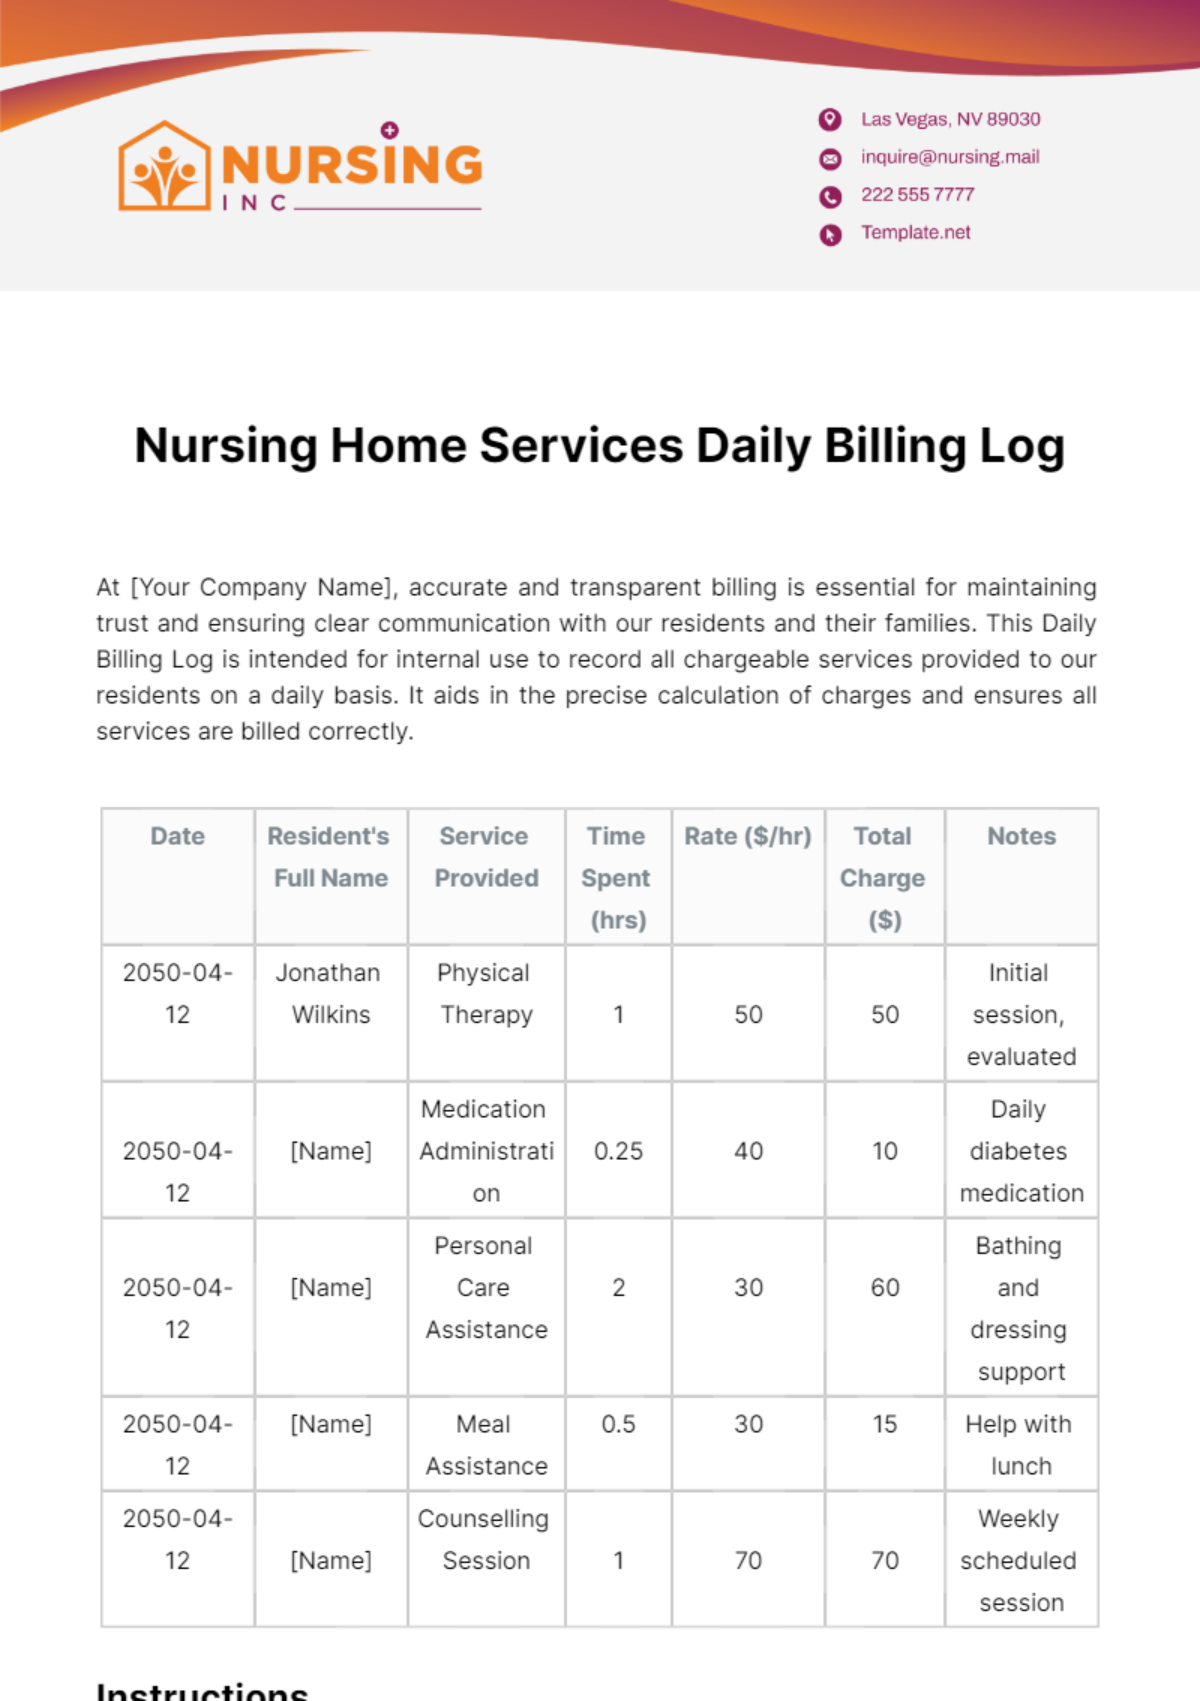 Nursing Home Services Daily Billing Log Template